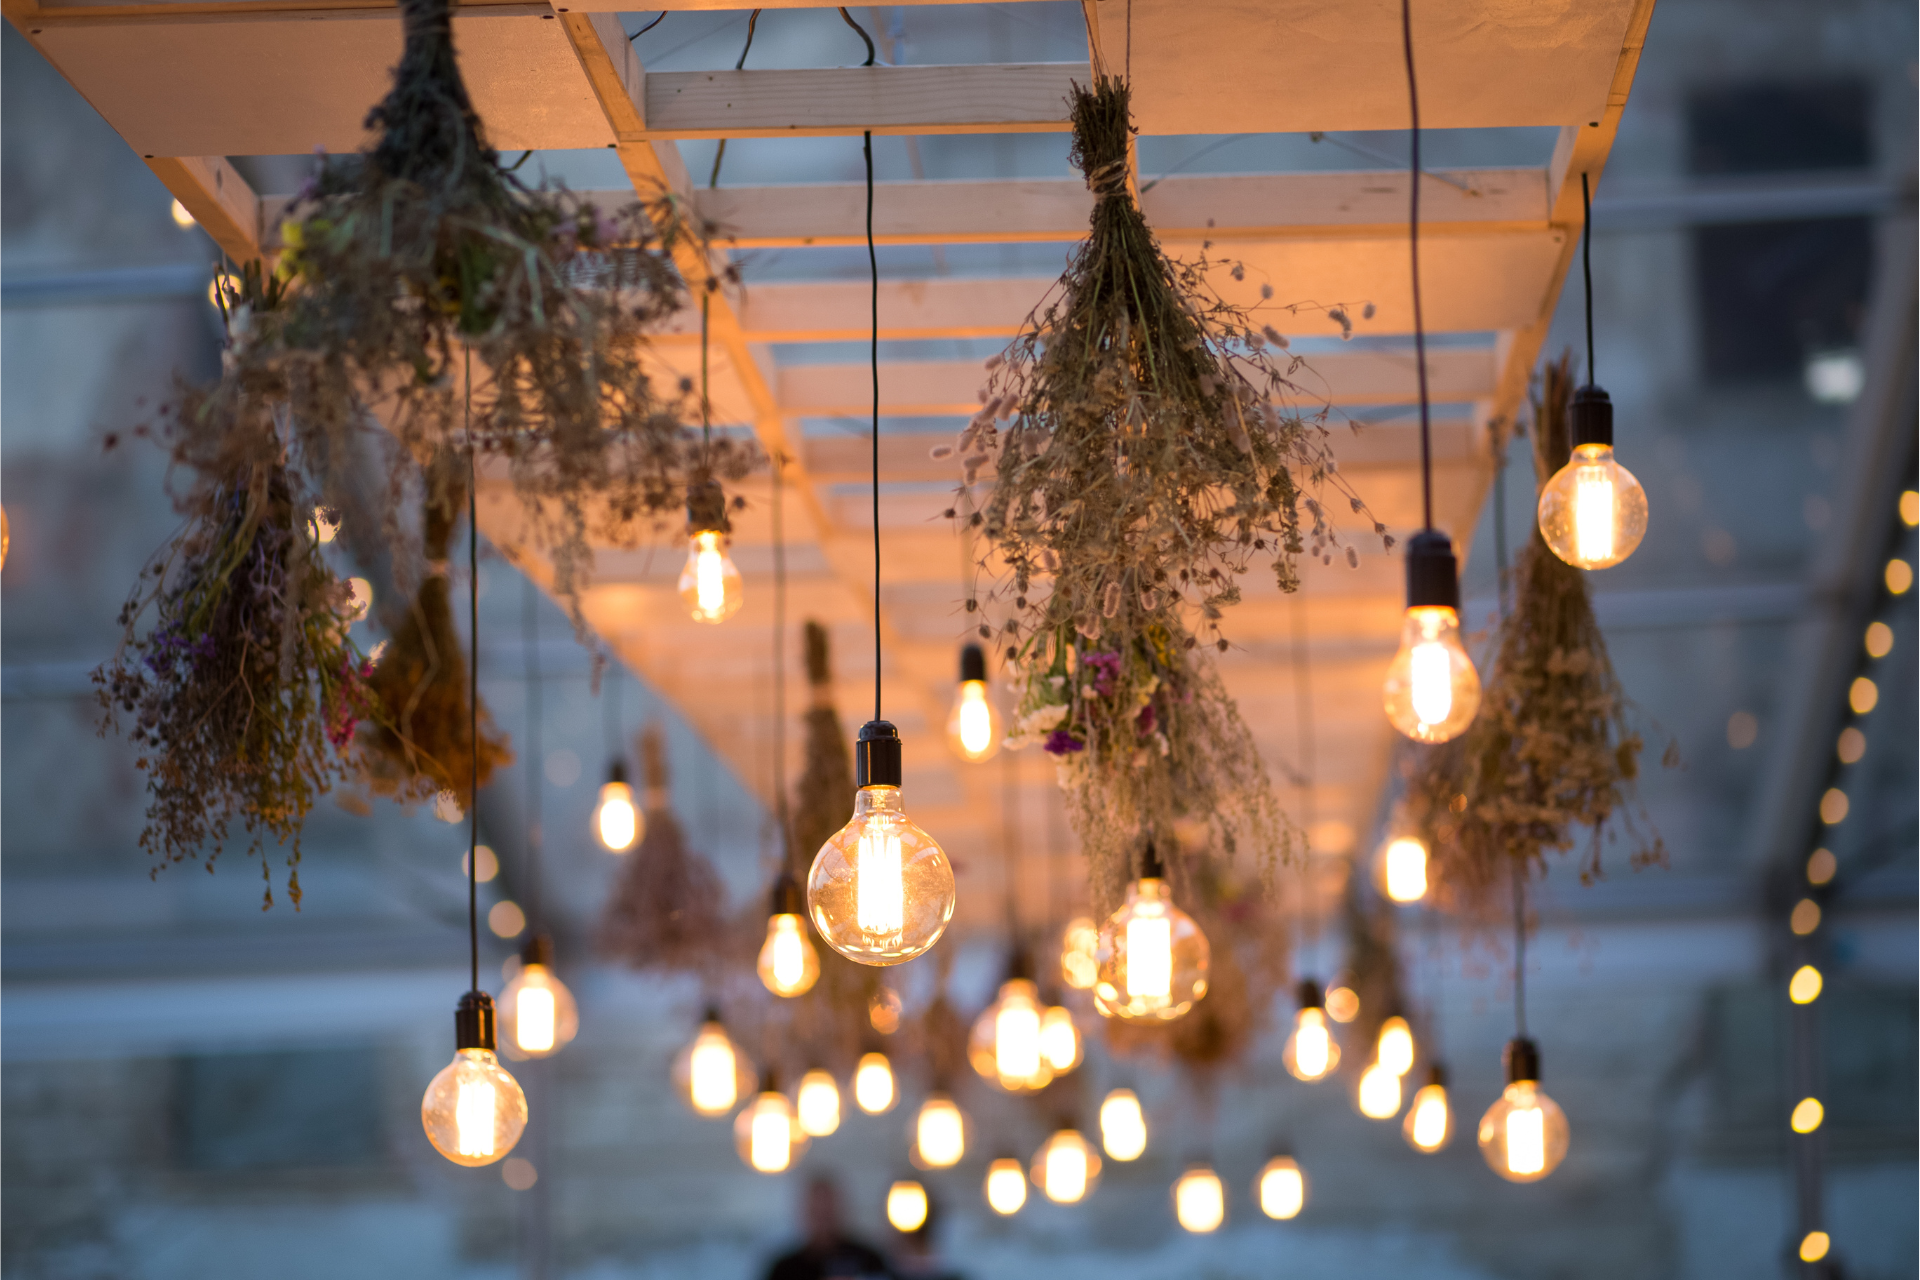 exposed light bulbs and dried flowers hang from a wooden structure at a restaurant